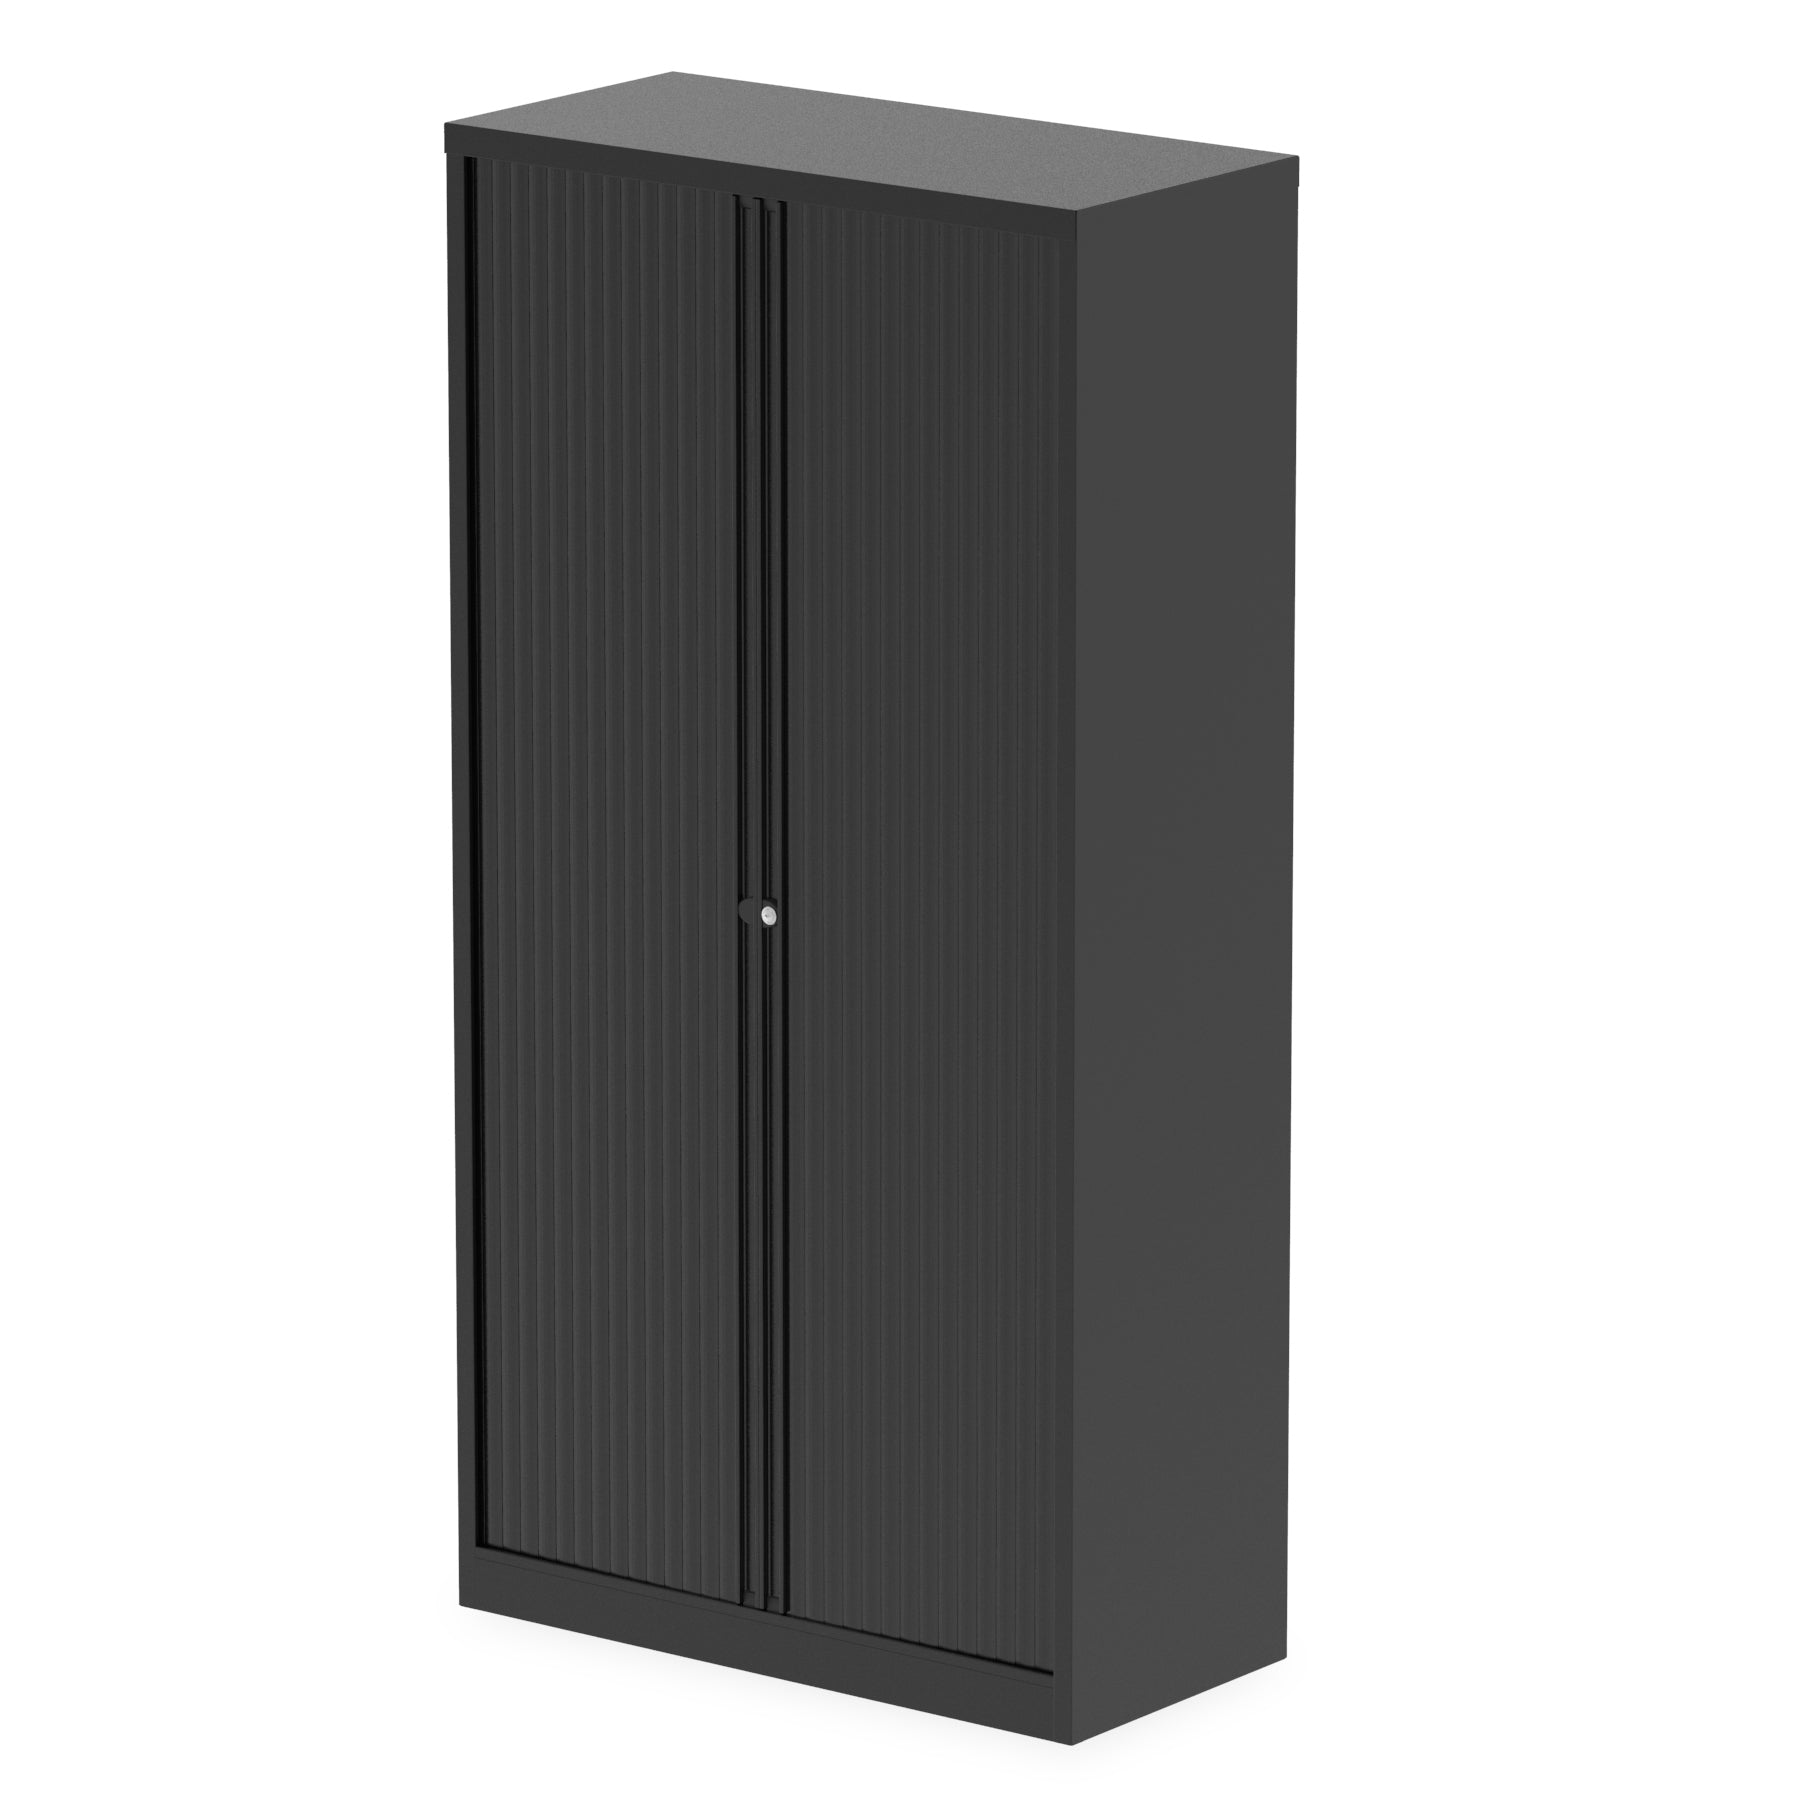 Qube by Bisley Tambour Cupboard (Available in 2 Sizes)